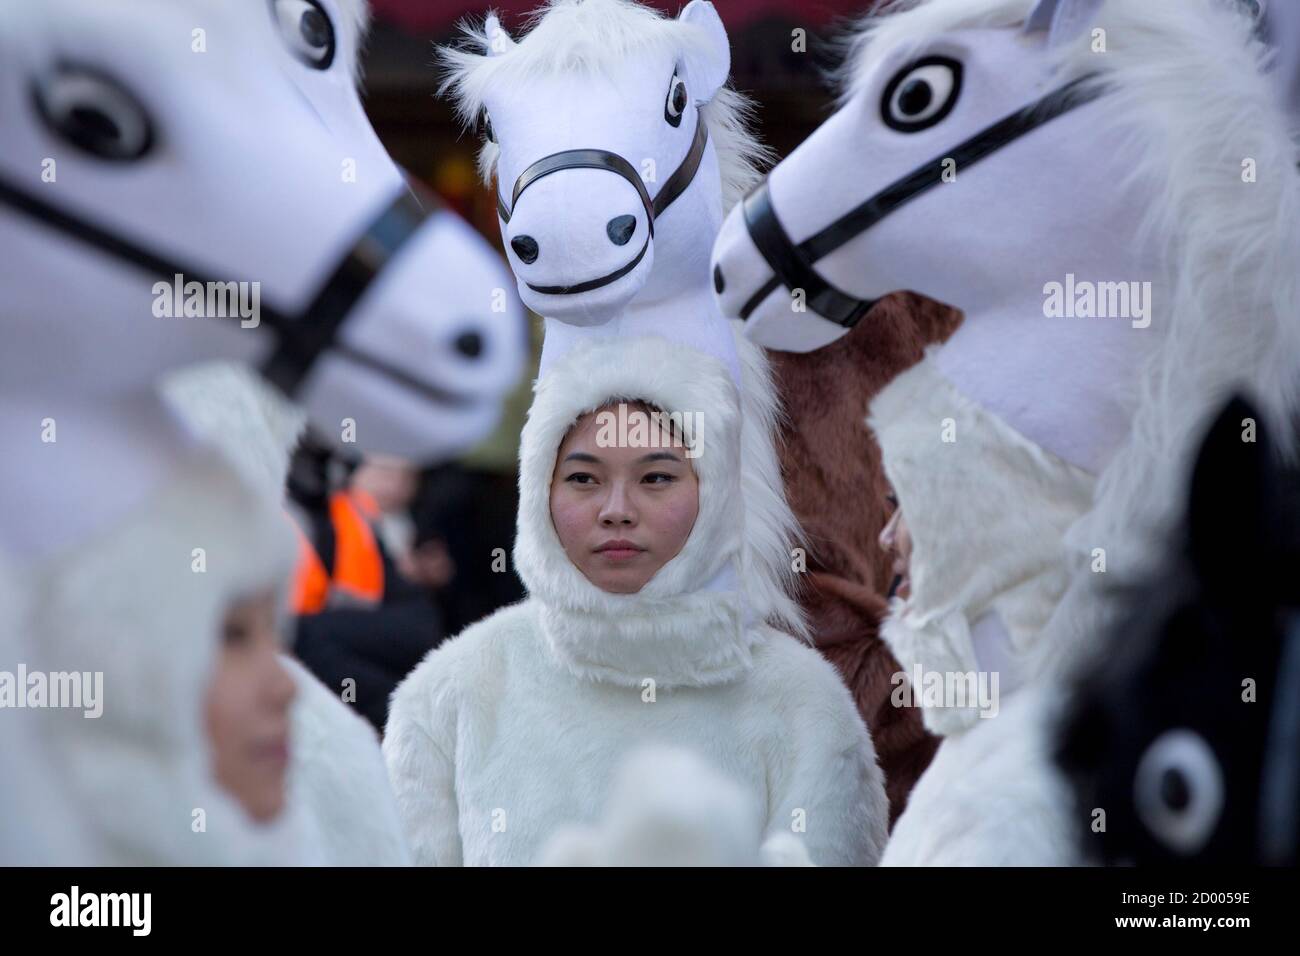 Revellers dressed in costumes prepare for a parade celebrating Chinese New Year, the Year of the Horse, in central London Feburary 2, 2014.   REUTERS/Neil Hall (BRITAIN - Tags: ANNIVERSARY ENTERTAINMENT SOCIETY TPX IMAGES OF THE DAY) Stock Photo